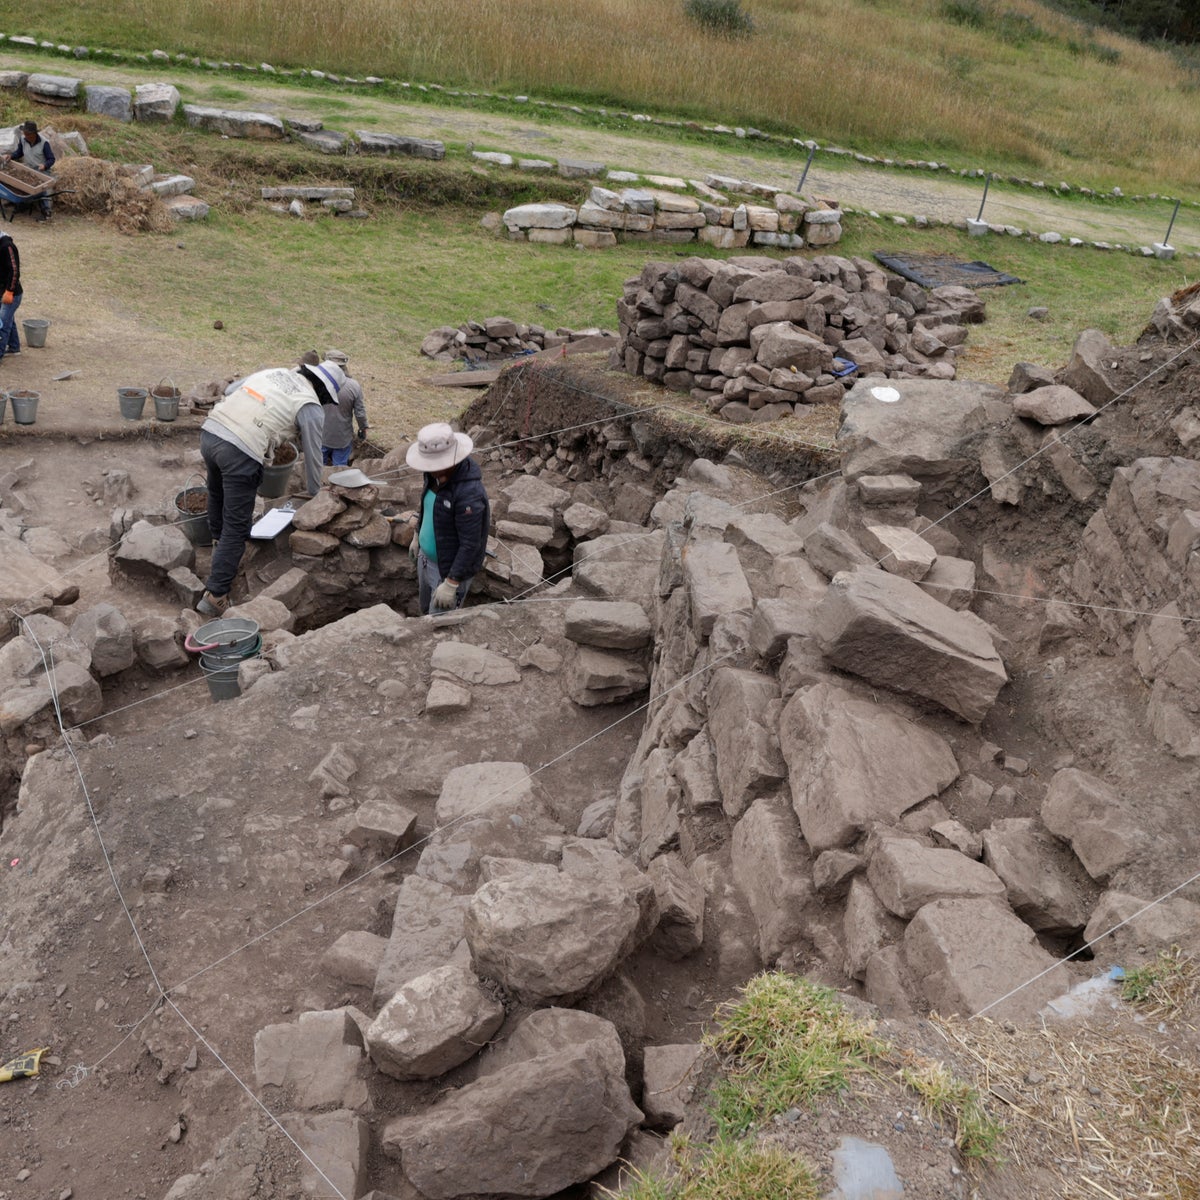 Archaeologists in Peru make a remarkable find: a condor’s passageway dating back 3,000 years